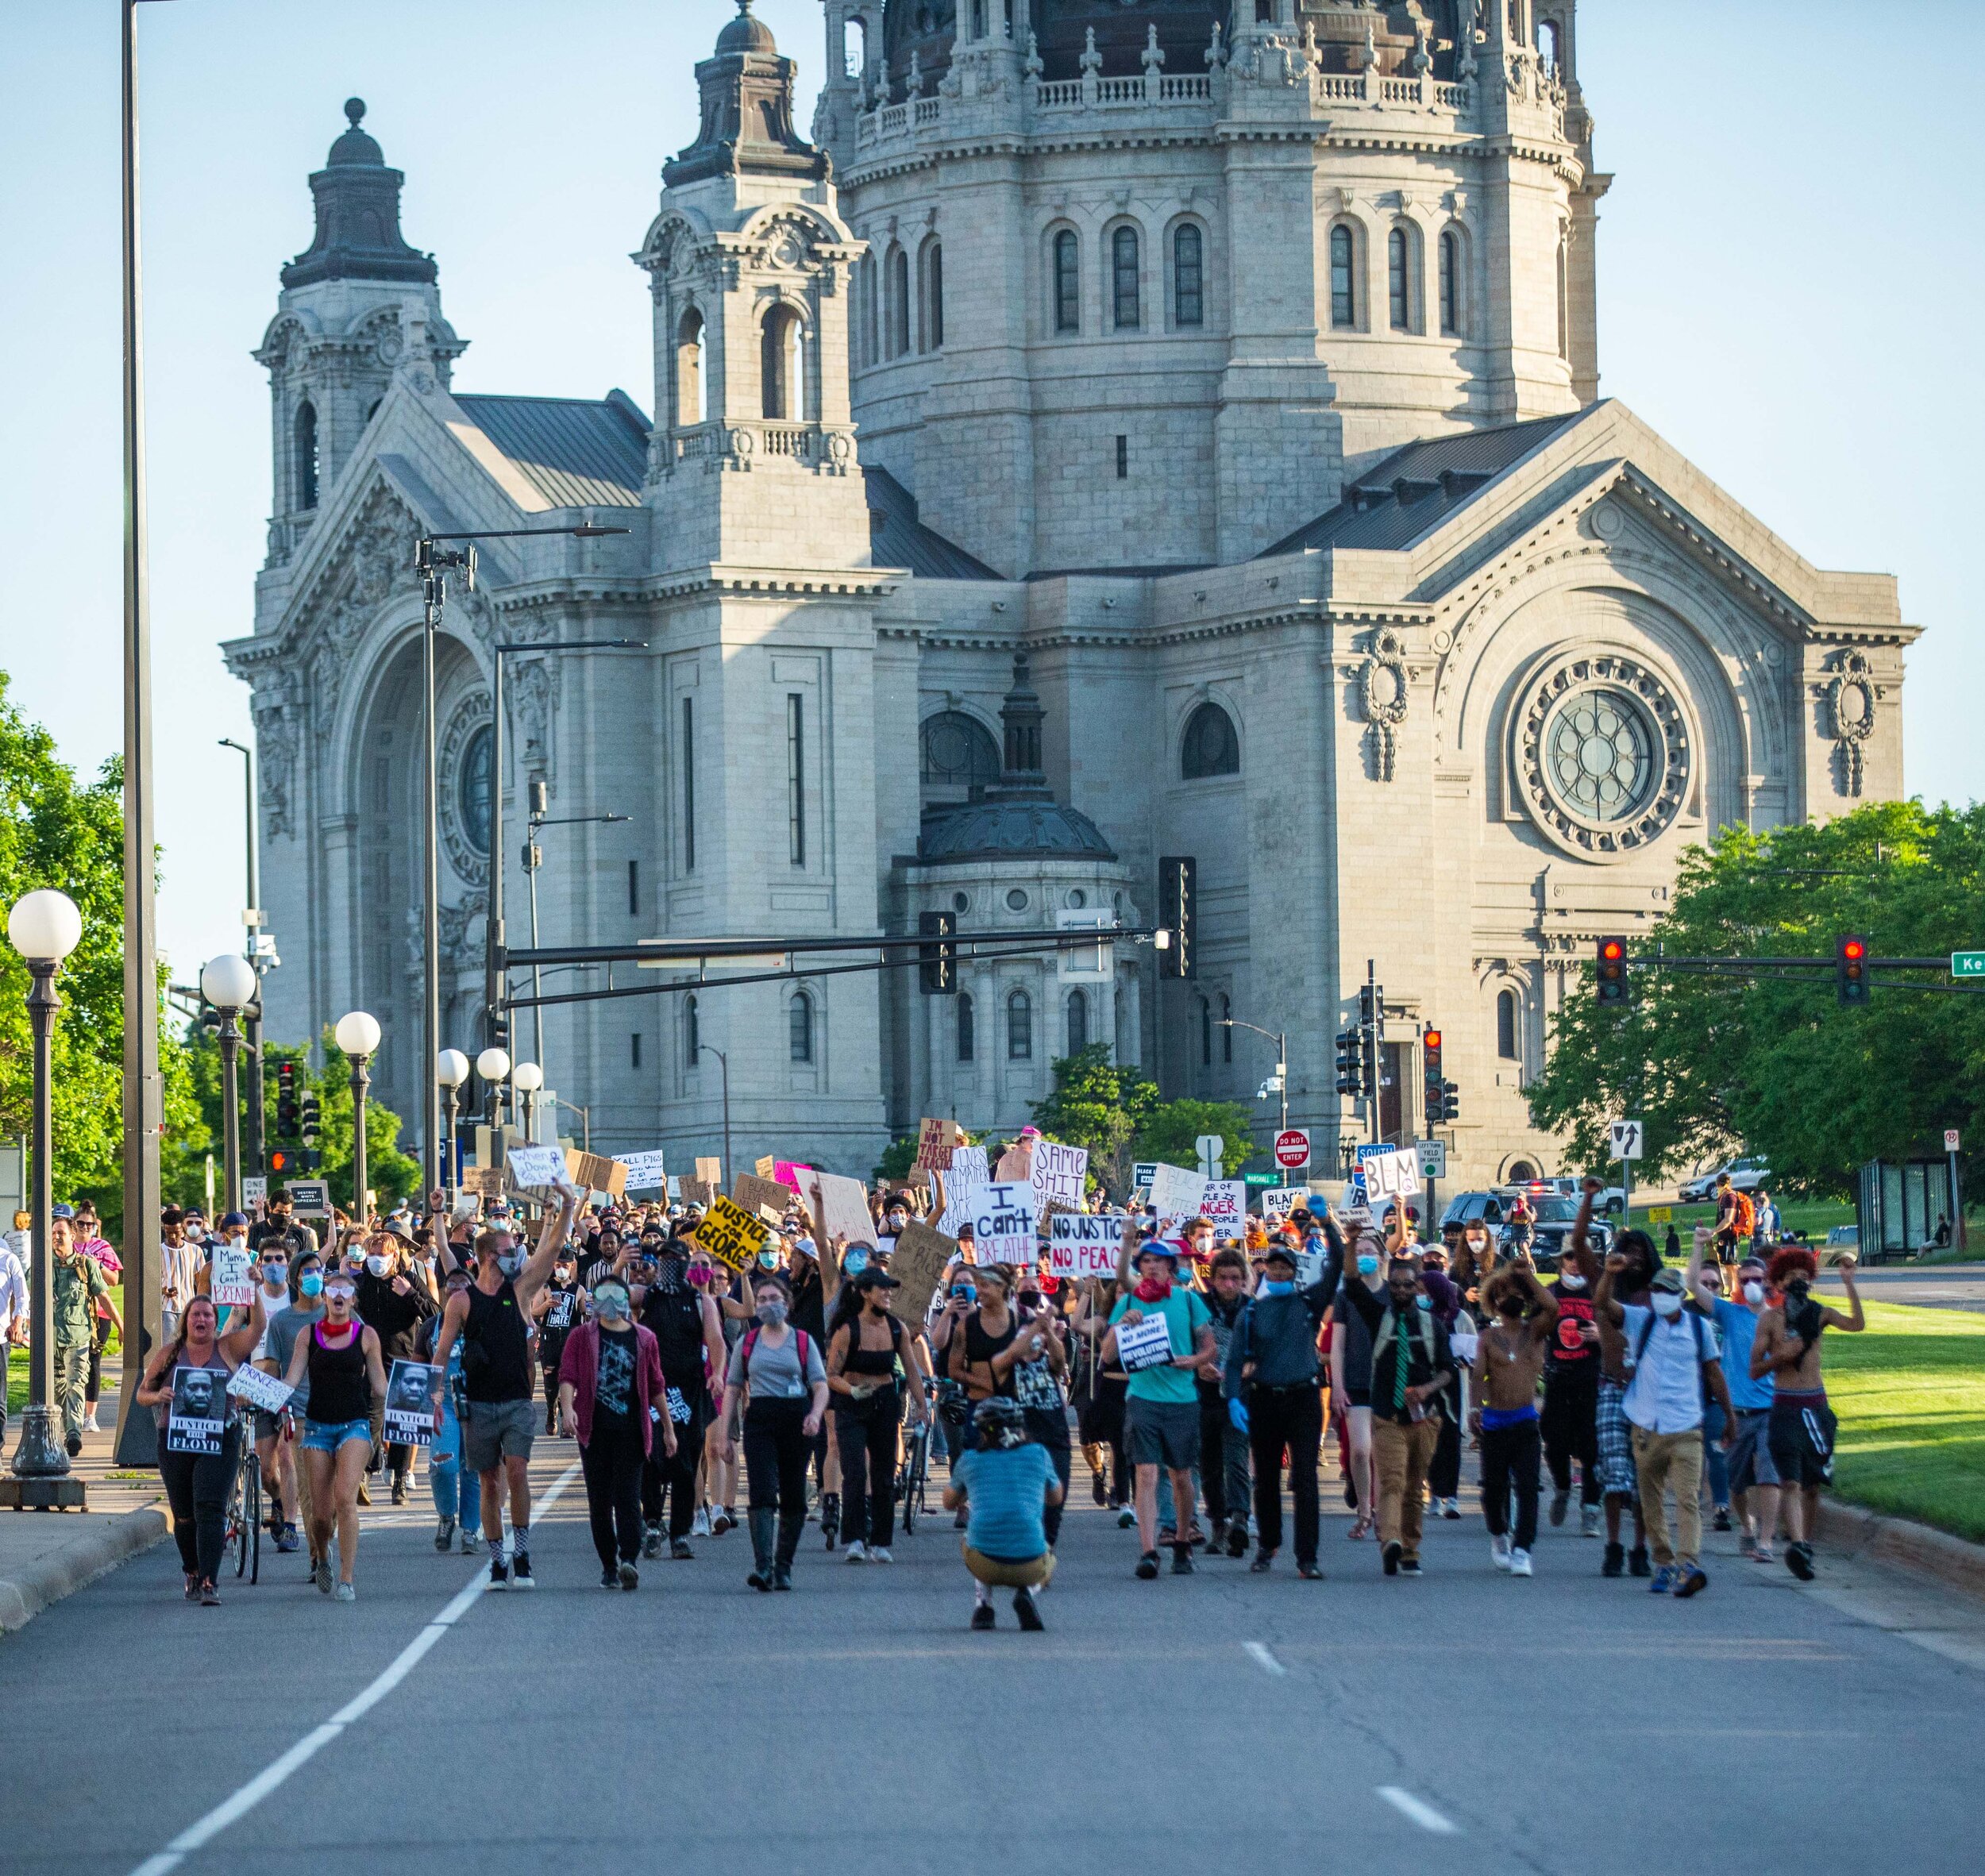  Protesters march down John Ireland Blvd as they head to the State Capitol building in Saint Paul, Minnesota on June 1, 2020. Chris Juhn/Zenger 